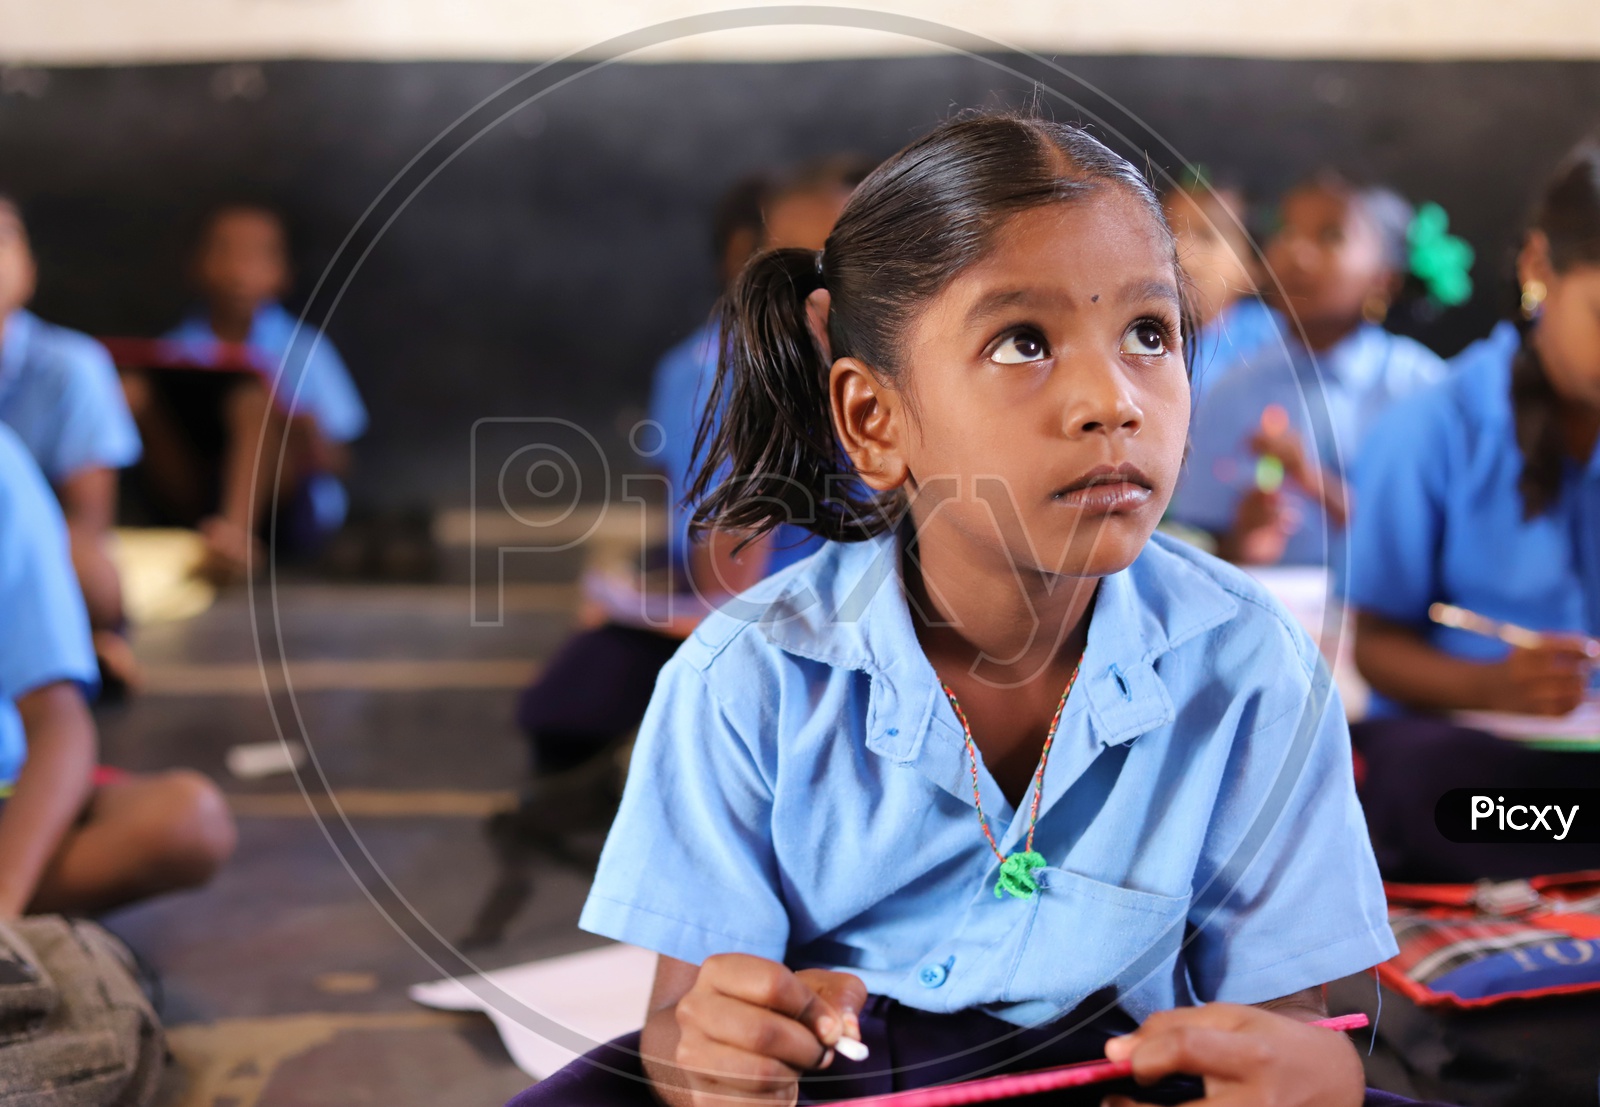 A girl student looking at blackboard.